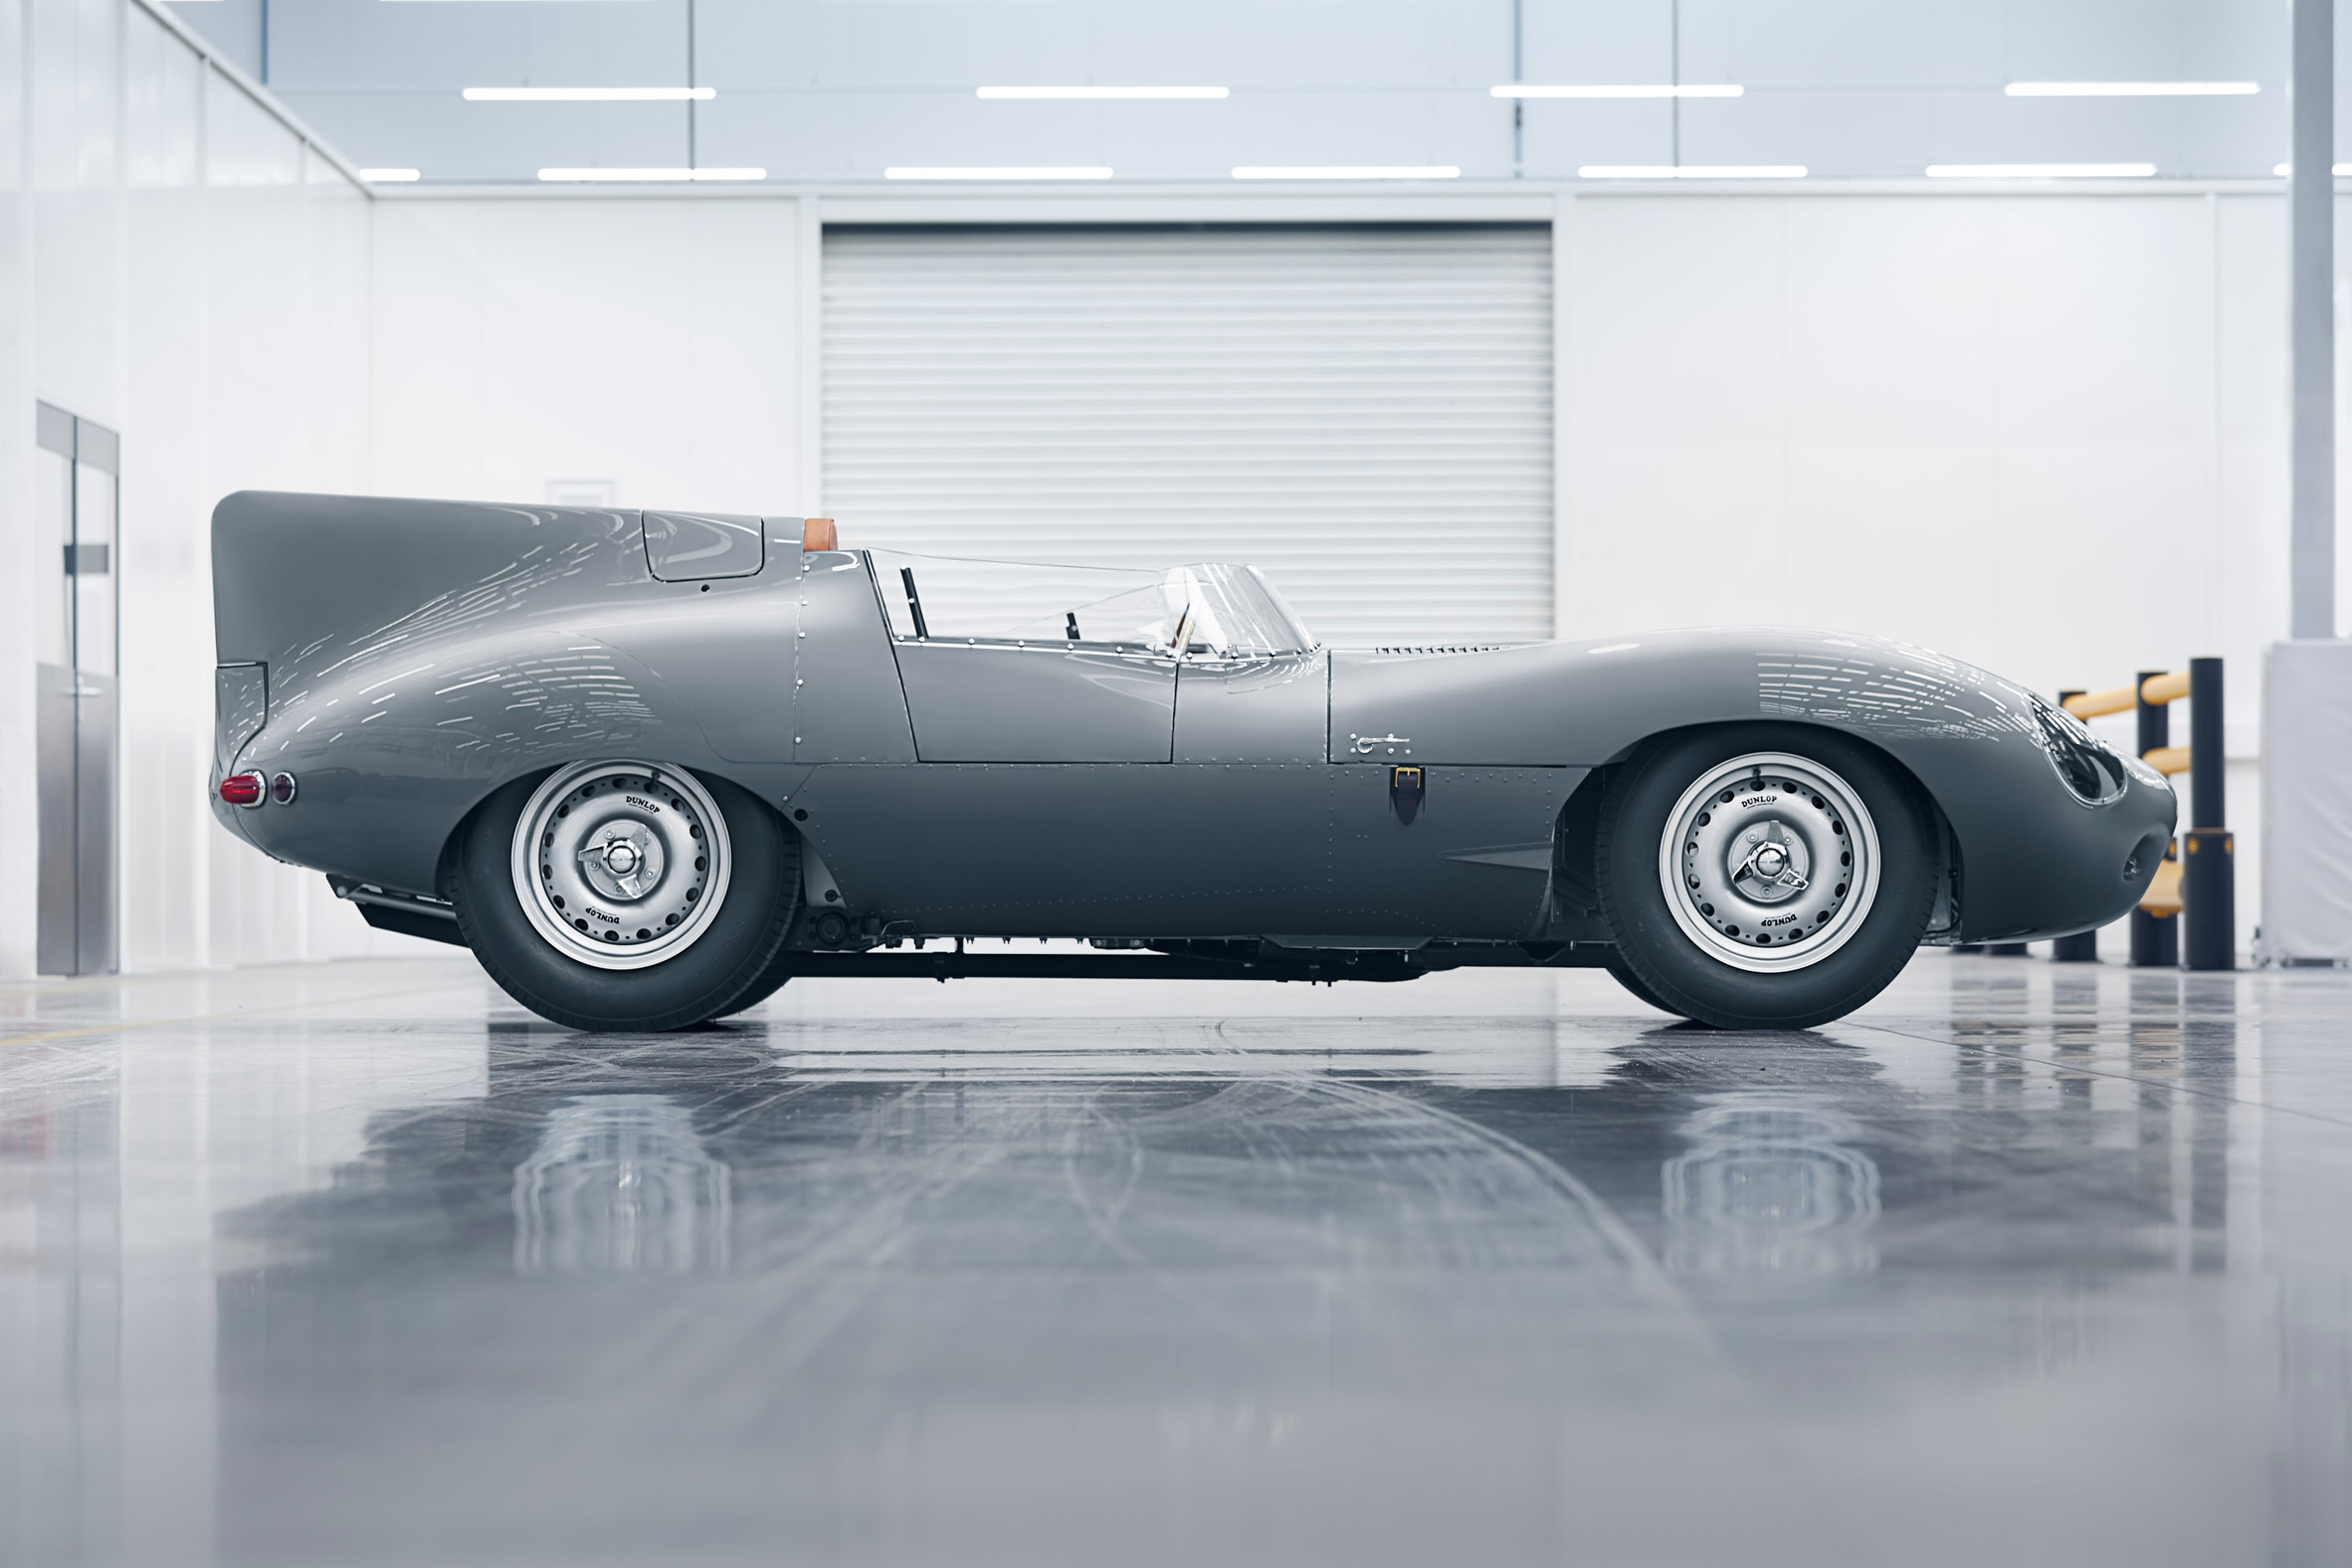 This 1954 Jaguar D-Type Race Car Will Have Collectors in a Frenzy